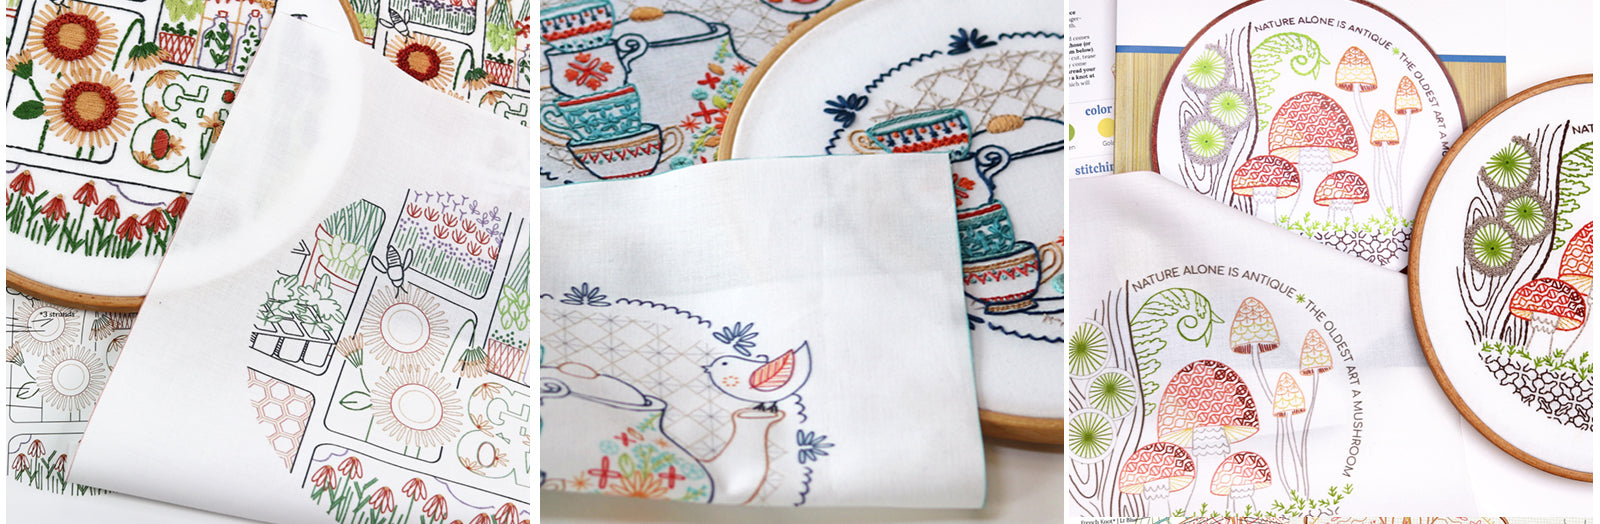 Printed fabric embroidery patterns. Three designs.